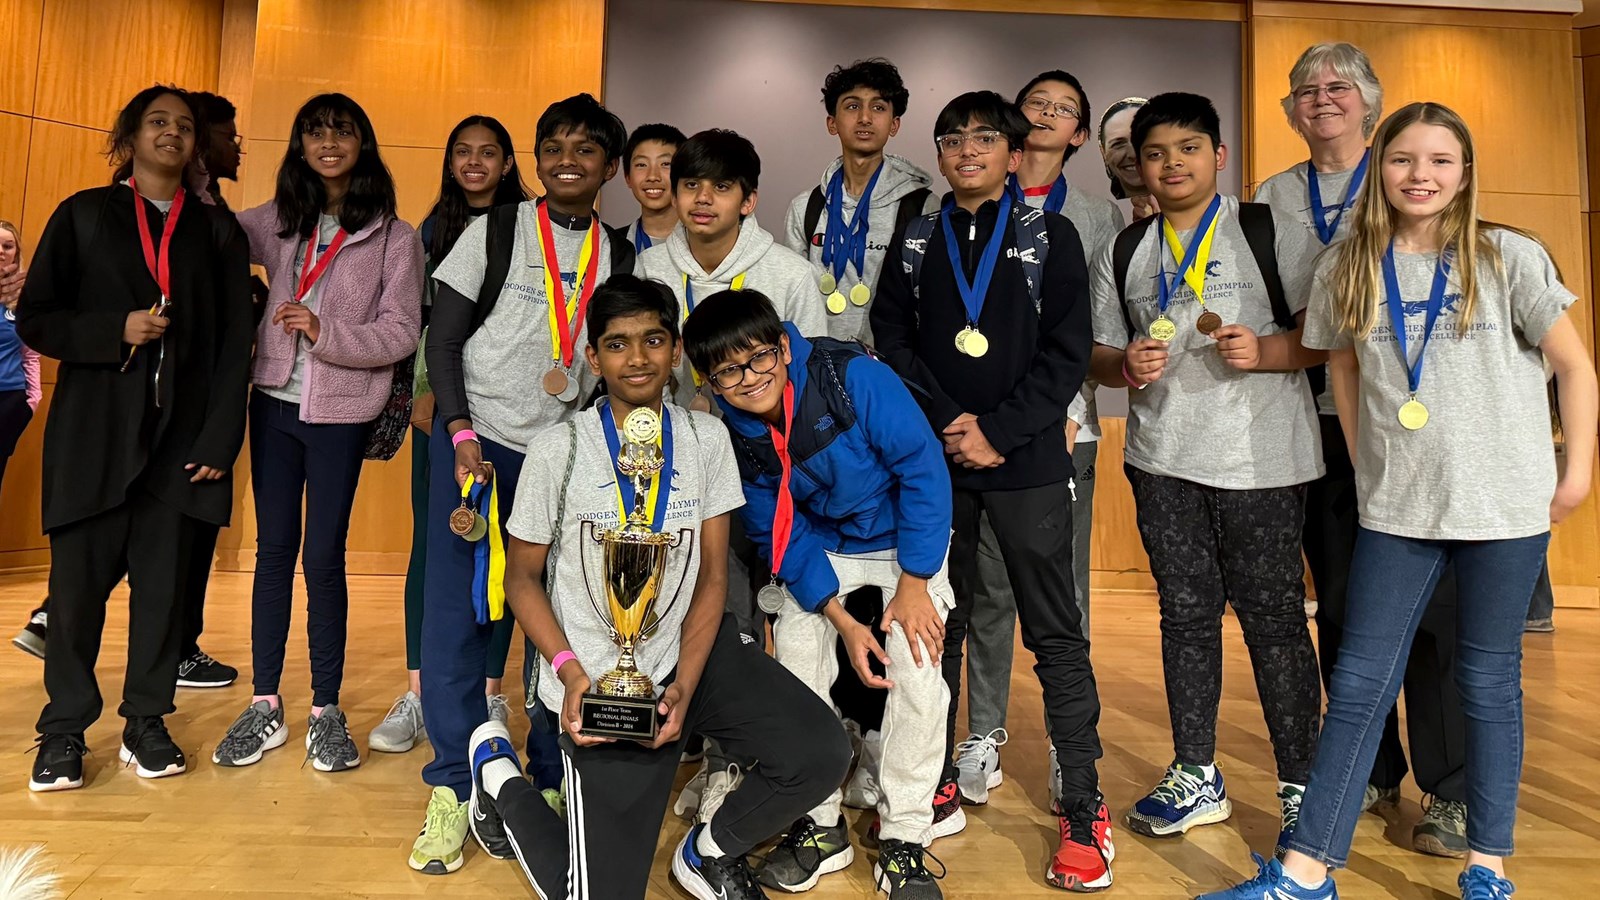 Science Olympiad Team holding trophy